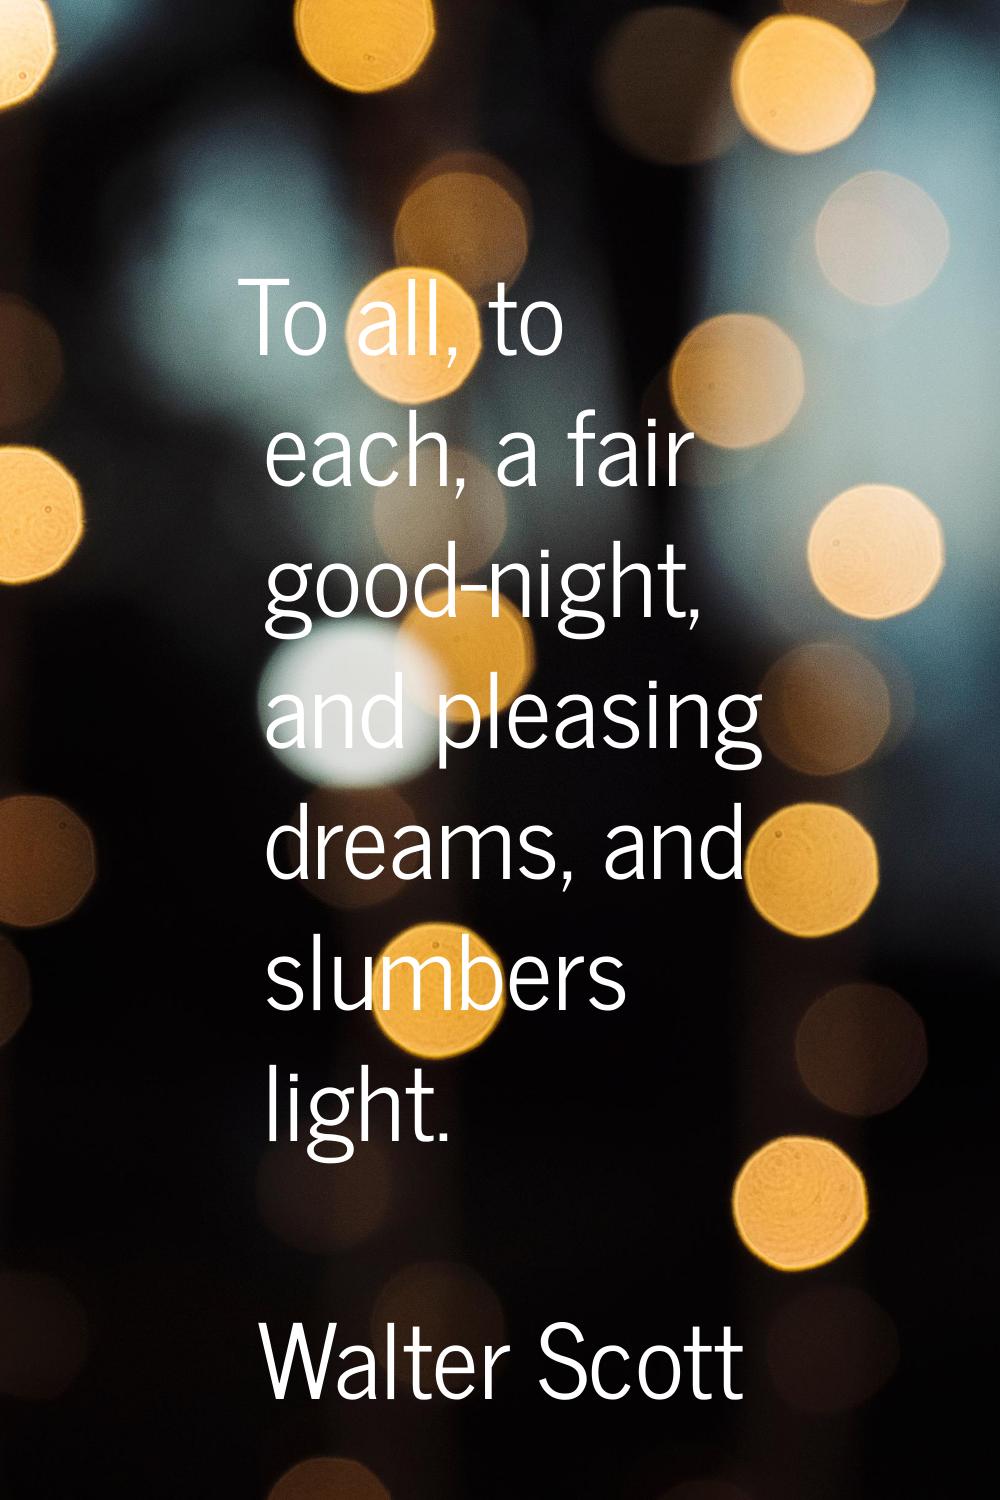 To all, to each, a fair good-night, and pleasing dreams, and slumbers light.